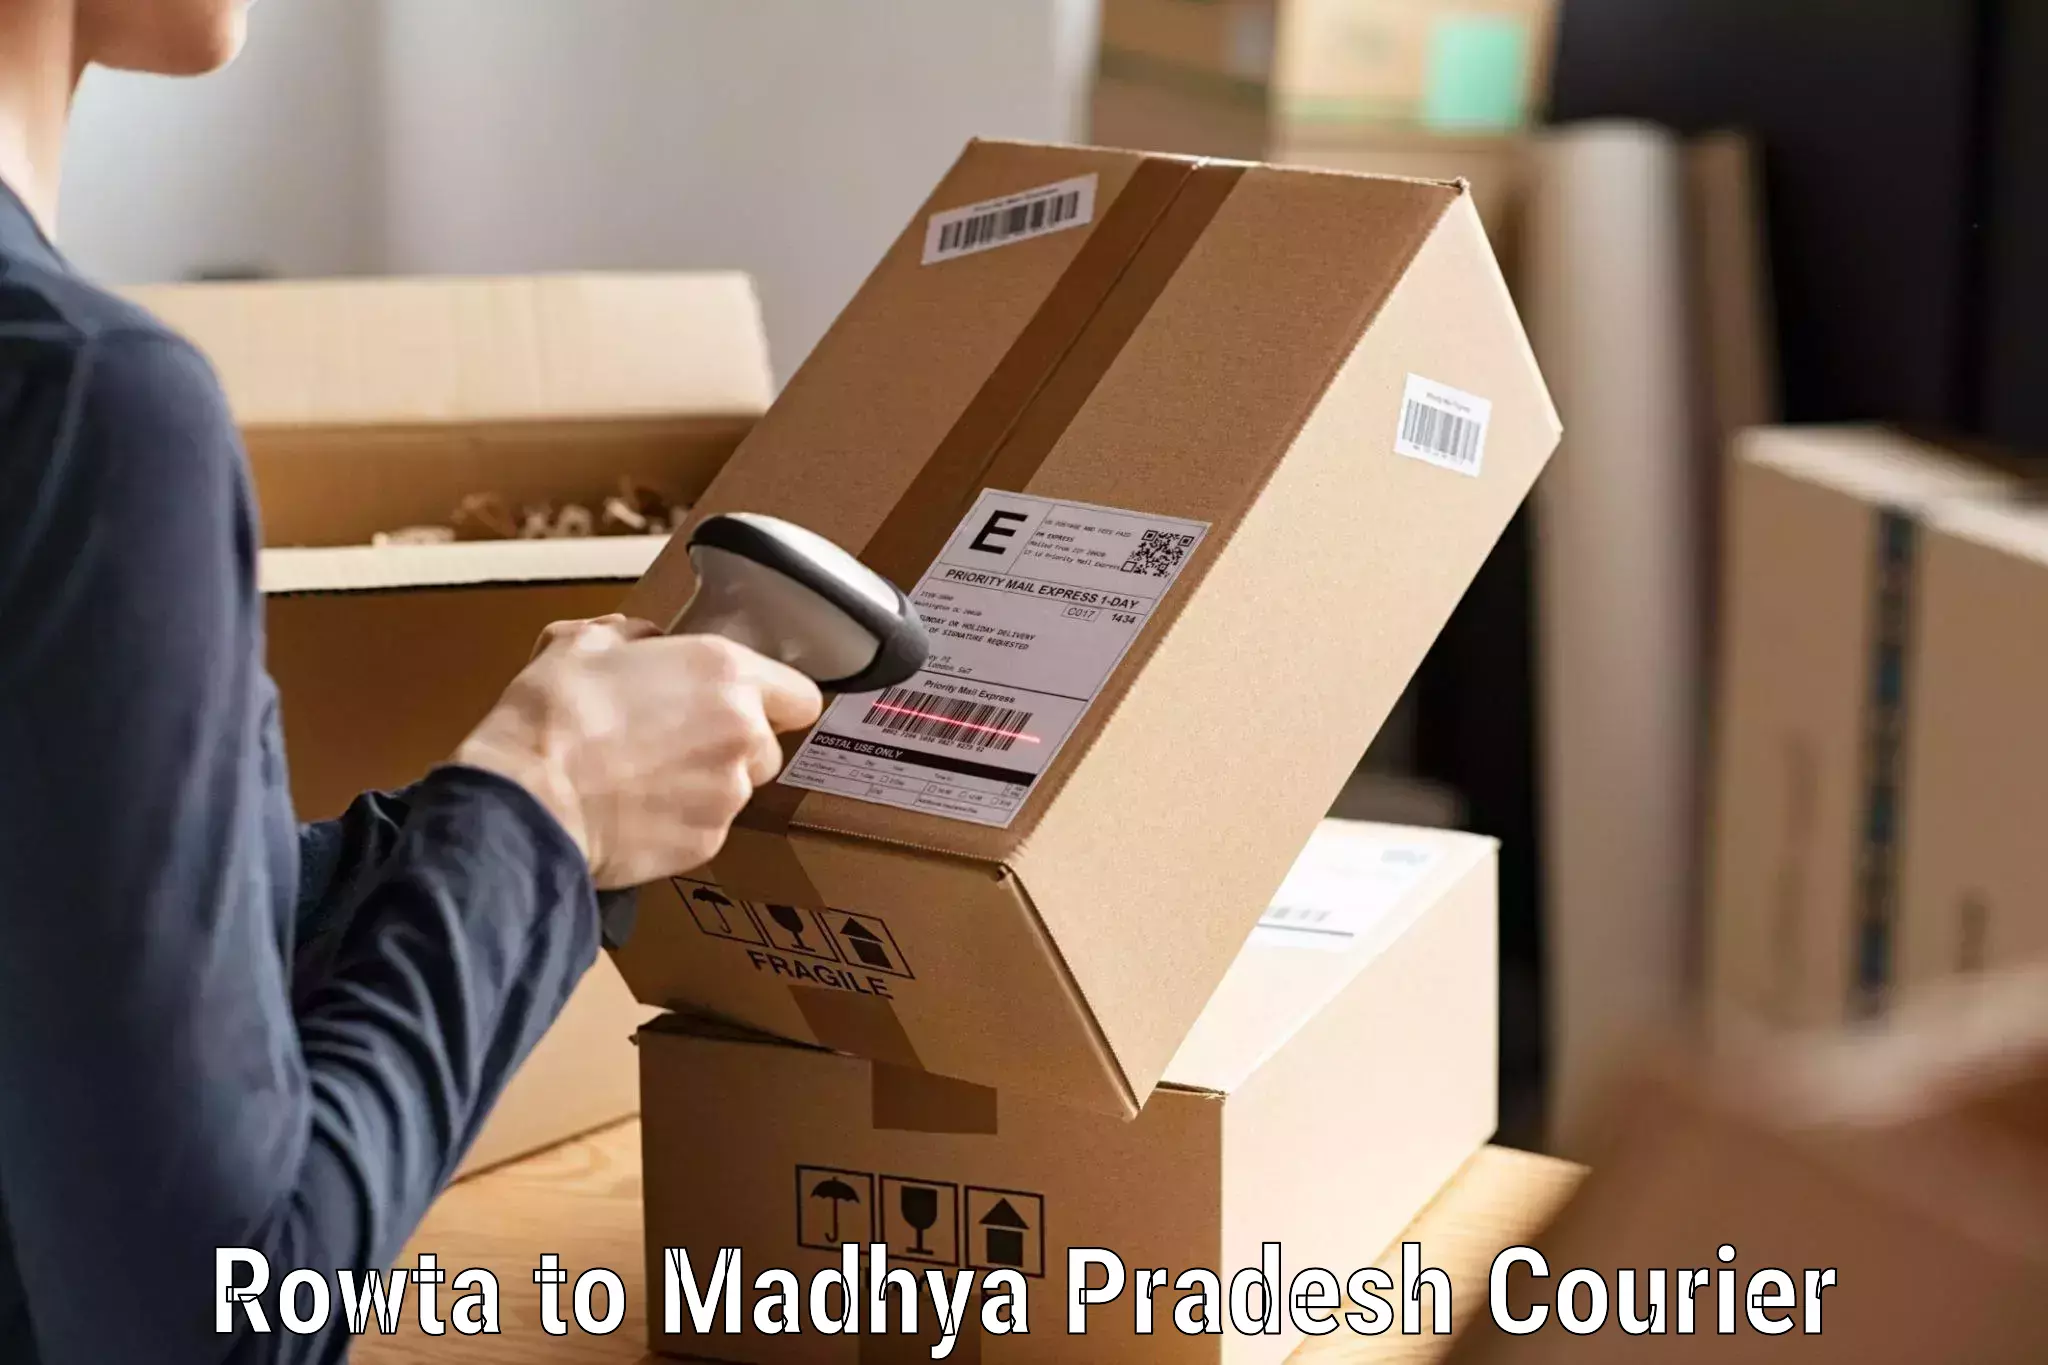 Parcel service for businesses Rowta to Gotegaon